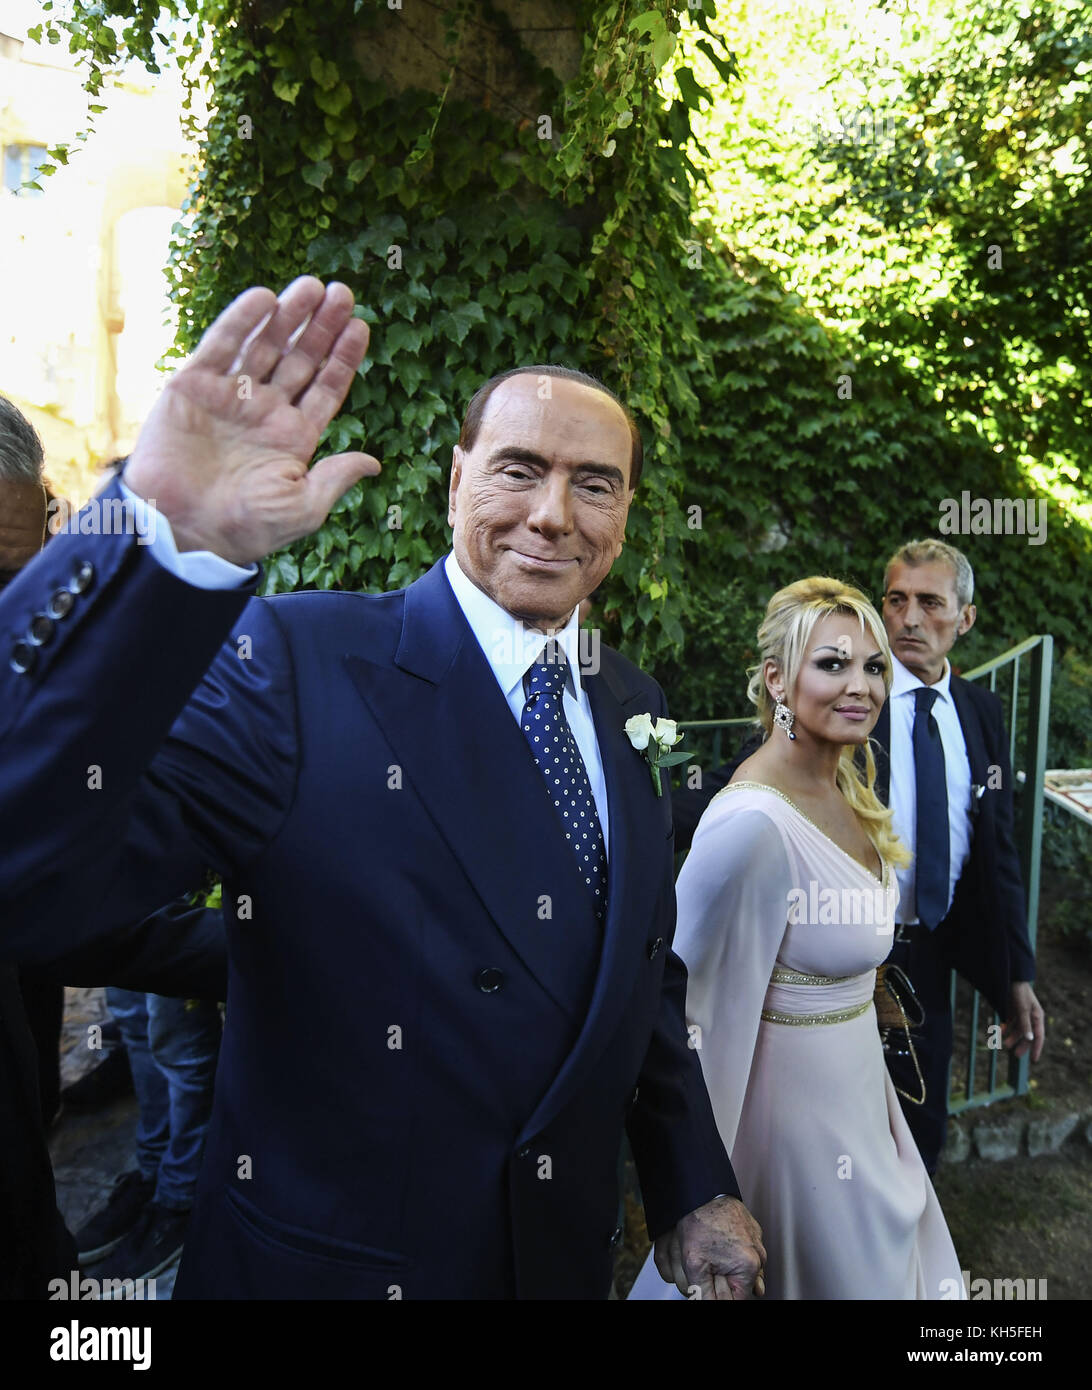 Silvio Berlusconi and his partner Francesca Pascale attend the wedding of her sister Marianna Pascale in Ravello  Featuring: Silvio Berlusconi, Francesca Pascale Where: Ravello, Italy When: 13 Oct 2017 Credit: IPA/WENN.com  **Only available for publication in UK, USA, Germany, Austria, Switzerland** Stock Photo